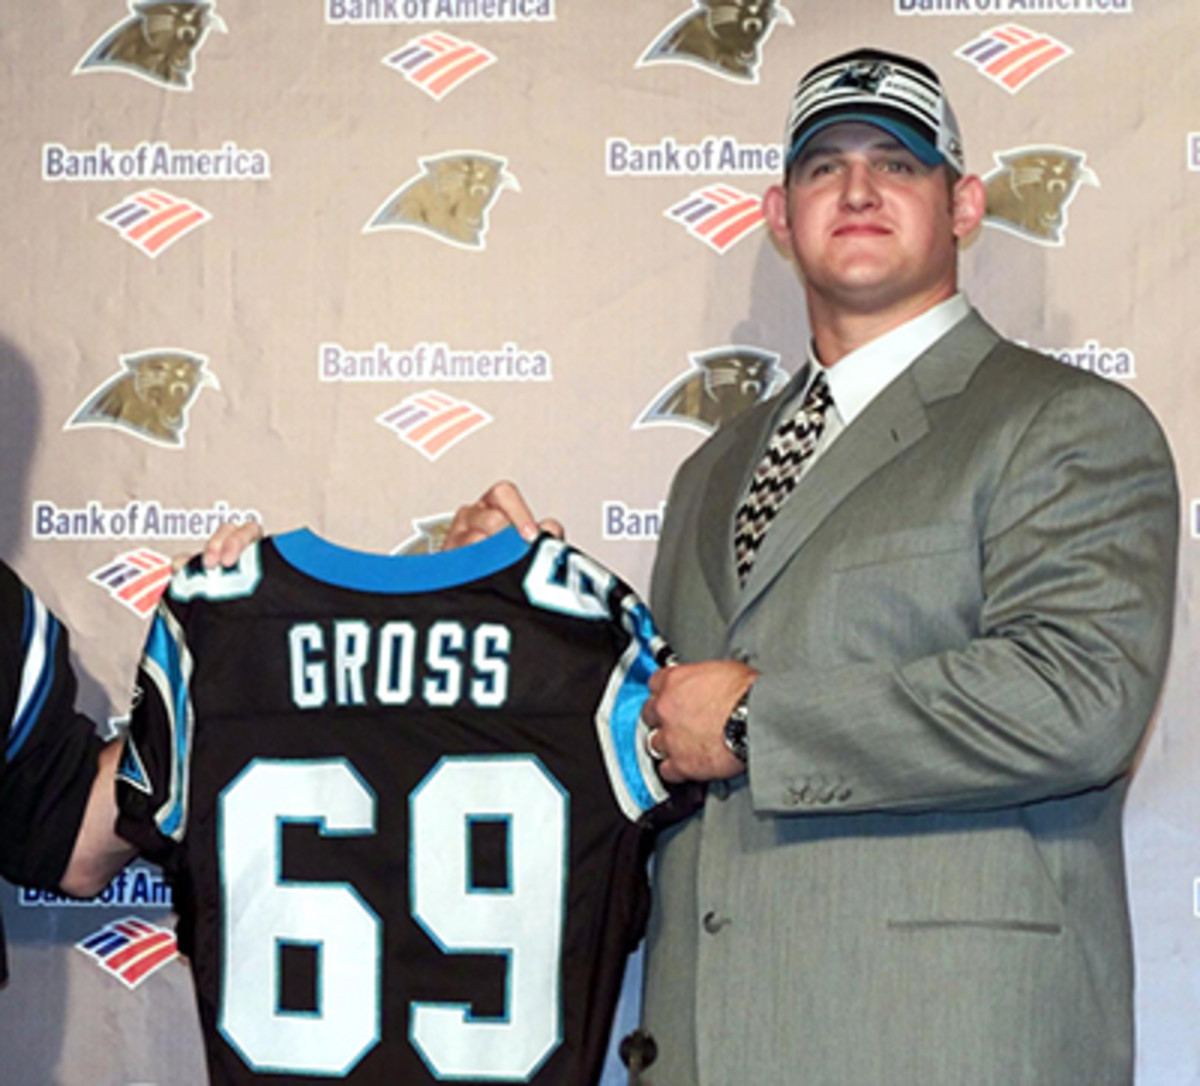 Jordan Gross' ill-fitting suit provided some useful inspiration for the handbook. 